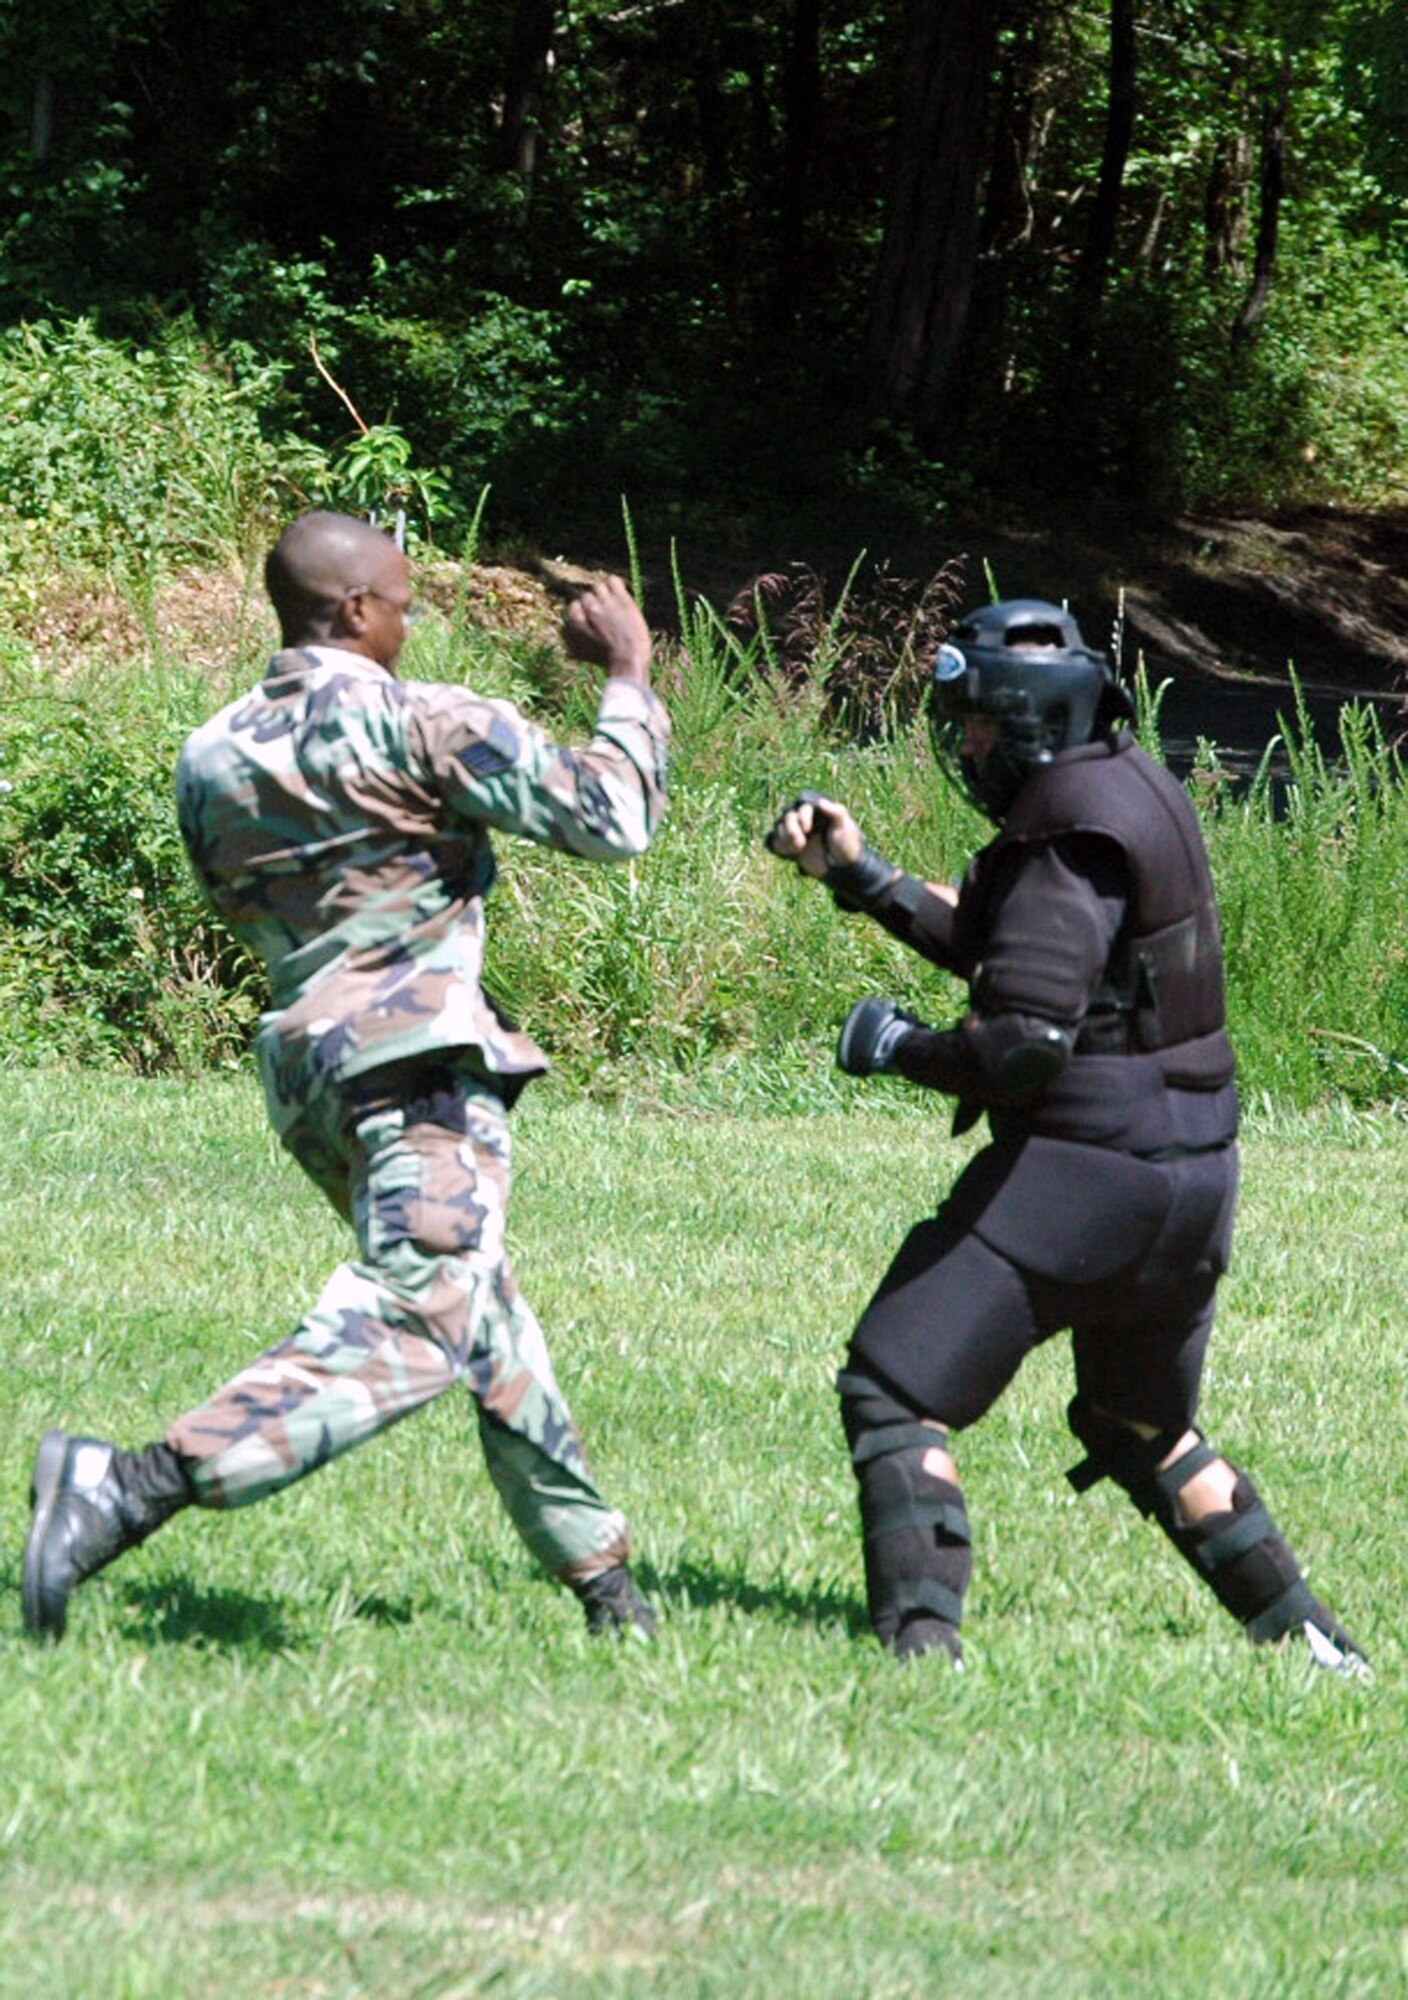 Staff Sgt. Michael Garner, from the 436th Security Forces Squadron, Dover Air Force Base, Del., and a student in the Air Force Phoenix Raven Course, fights back an "attacker" during an evaluation session in the course on a Fort Dix, N.J., range Aug. 20, 2008.  The course, taught by the U.S. Air Force Expeditionary Center's 421st Combat Training Squadron, trains security forces Airmen to become Ravens where they specialize in protecting Air Force aircraft in austere environments.  (U.S. Air Force Photo/Tech. Sgt. Scott T. Sturkol)